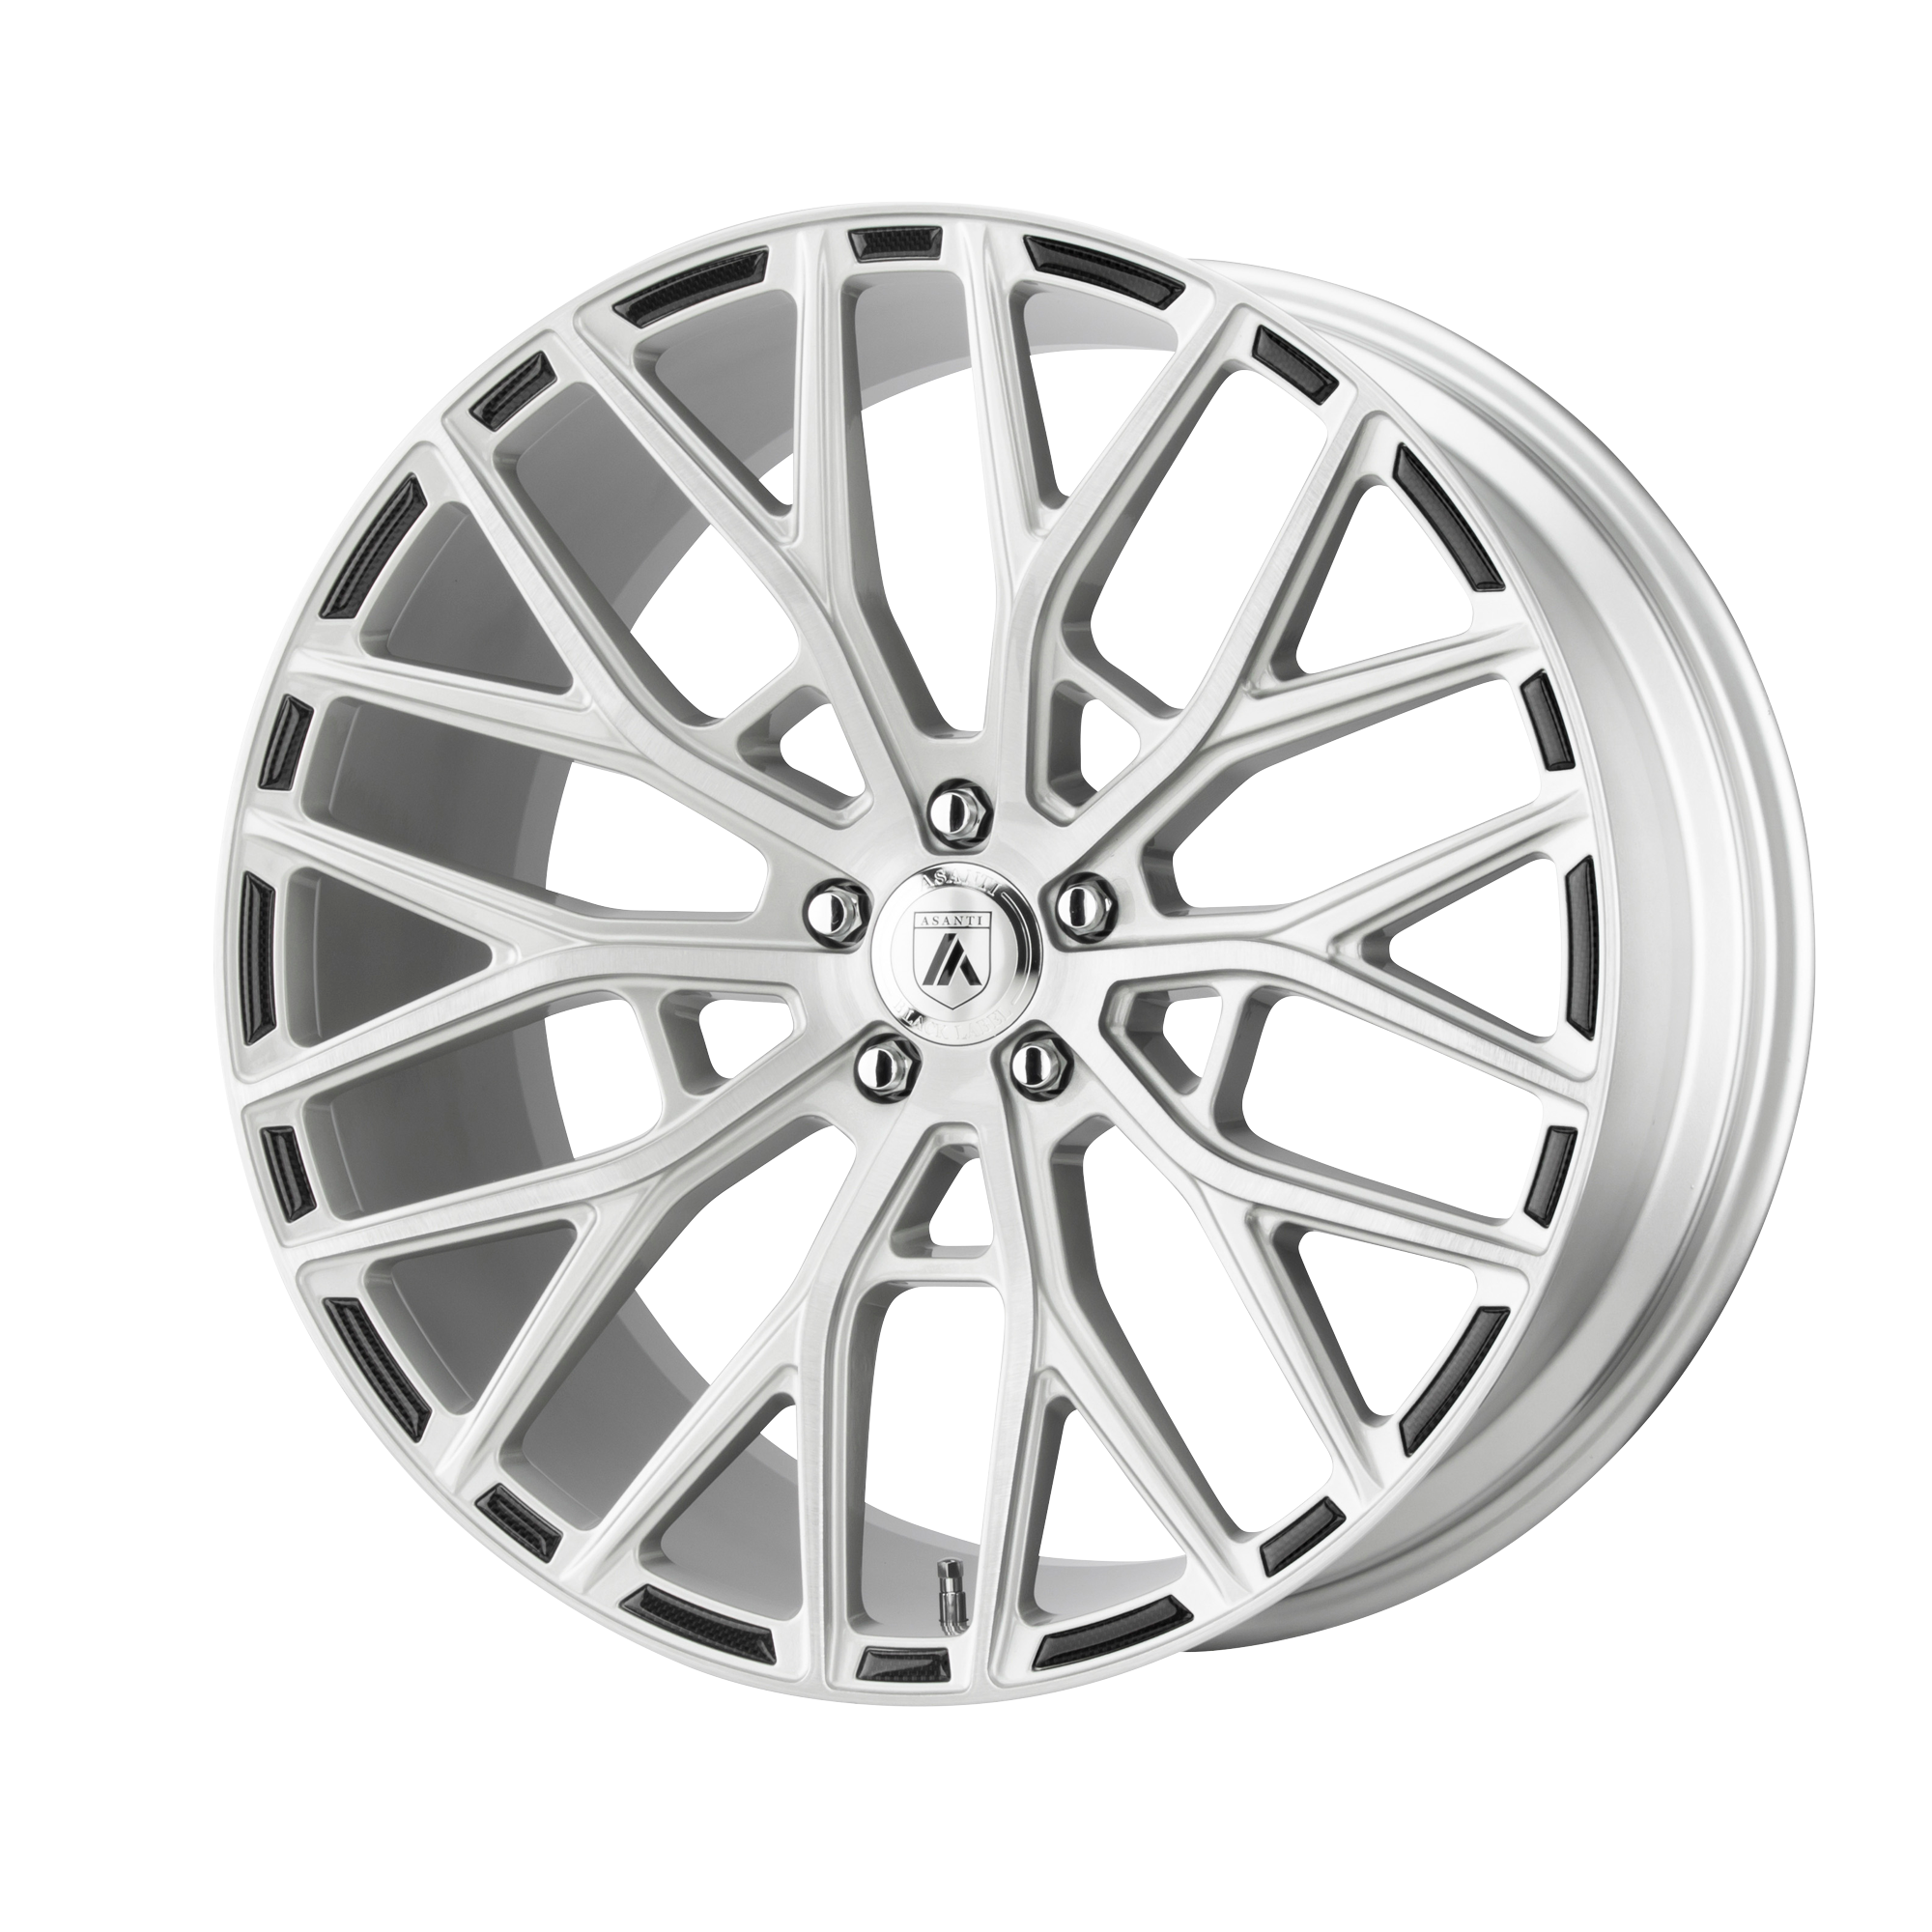 LEO 20x9 5x112.00 BRUSHED SILVER (35 mm) - Tires and Engine Performance